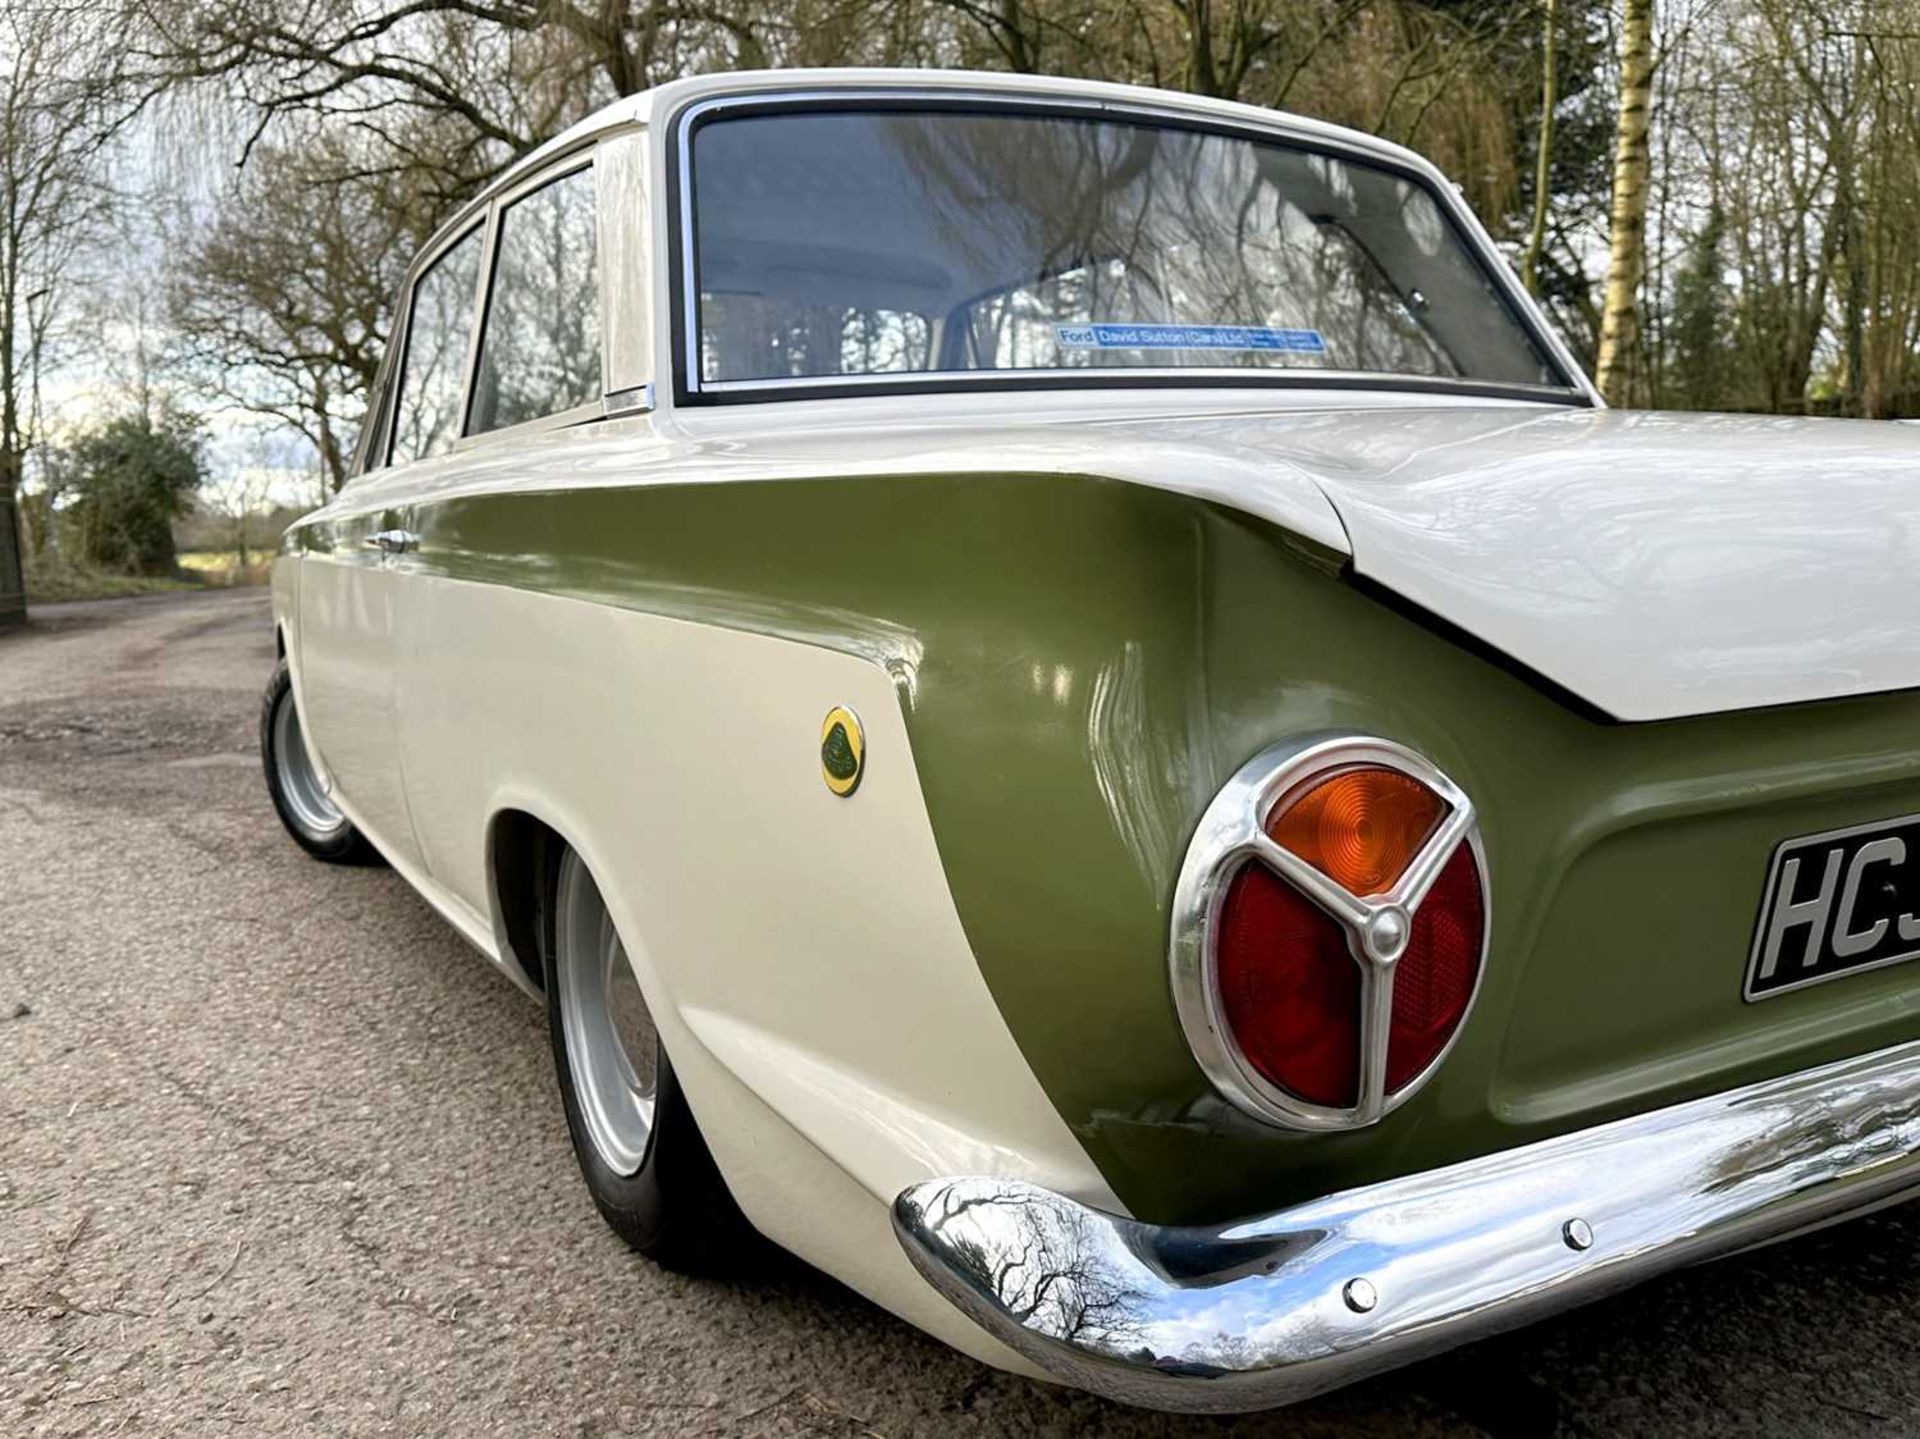 1963 Ford Lotus Cortina Pre-Aeroflow model, fitted with A-frame rear suspension - Image 49 of 58